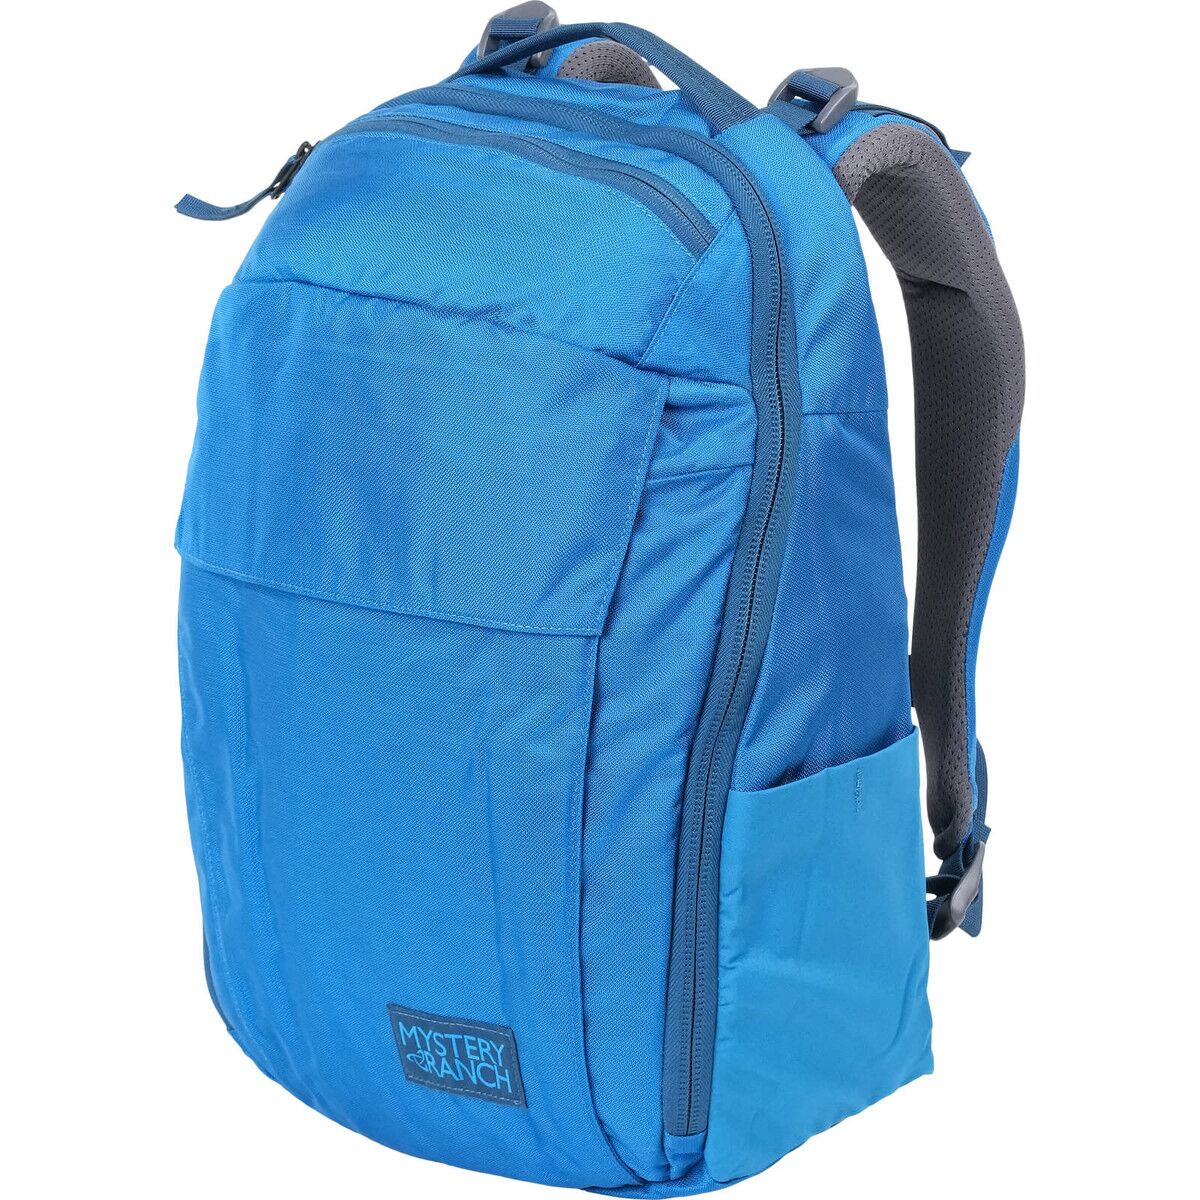 Mystery Ranch District 18L Backpack